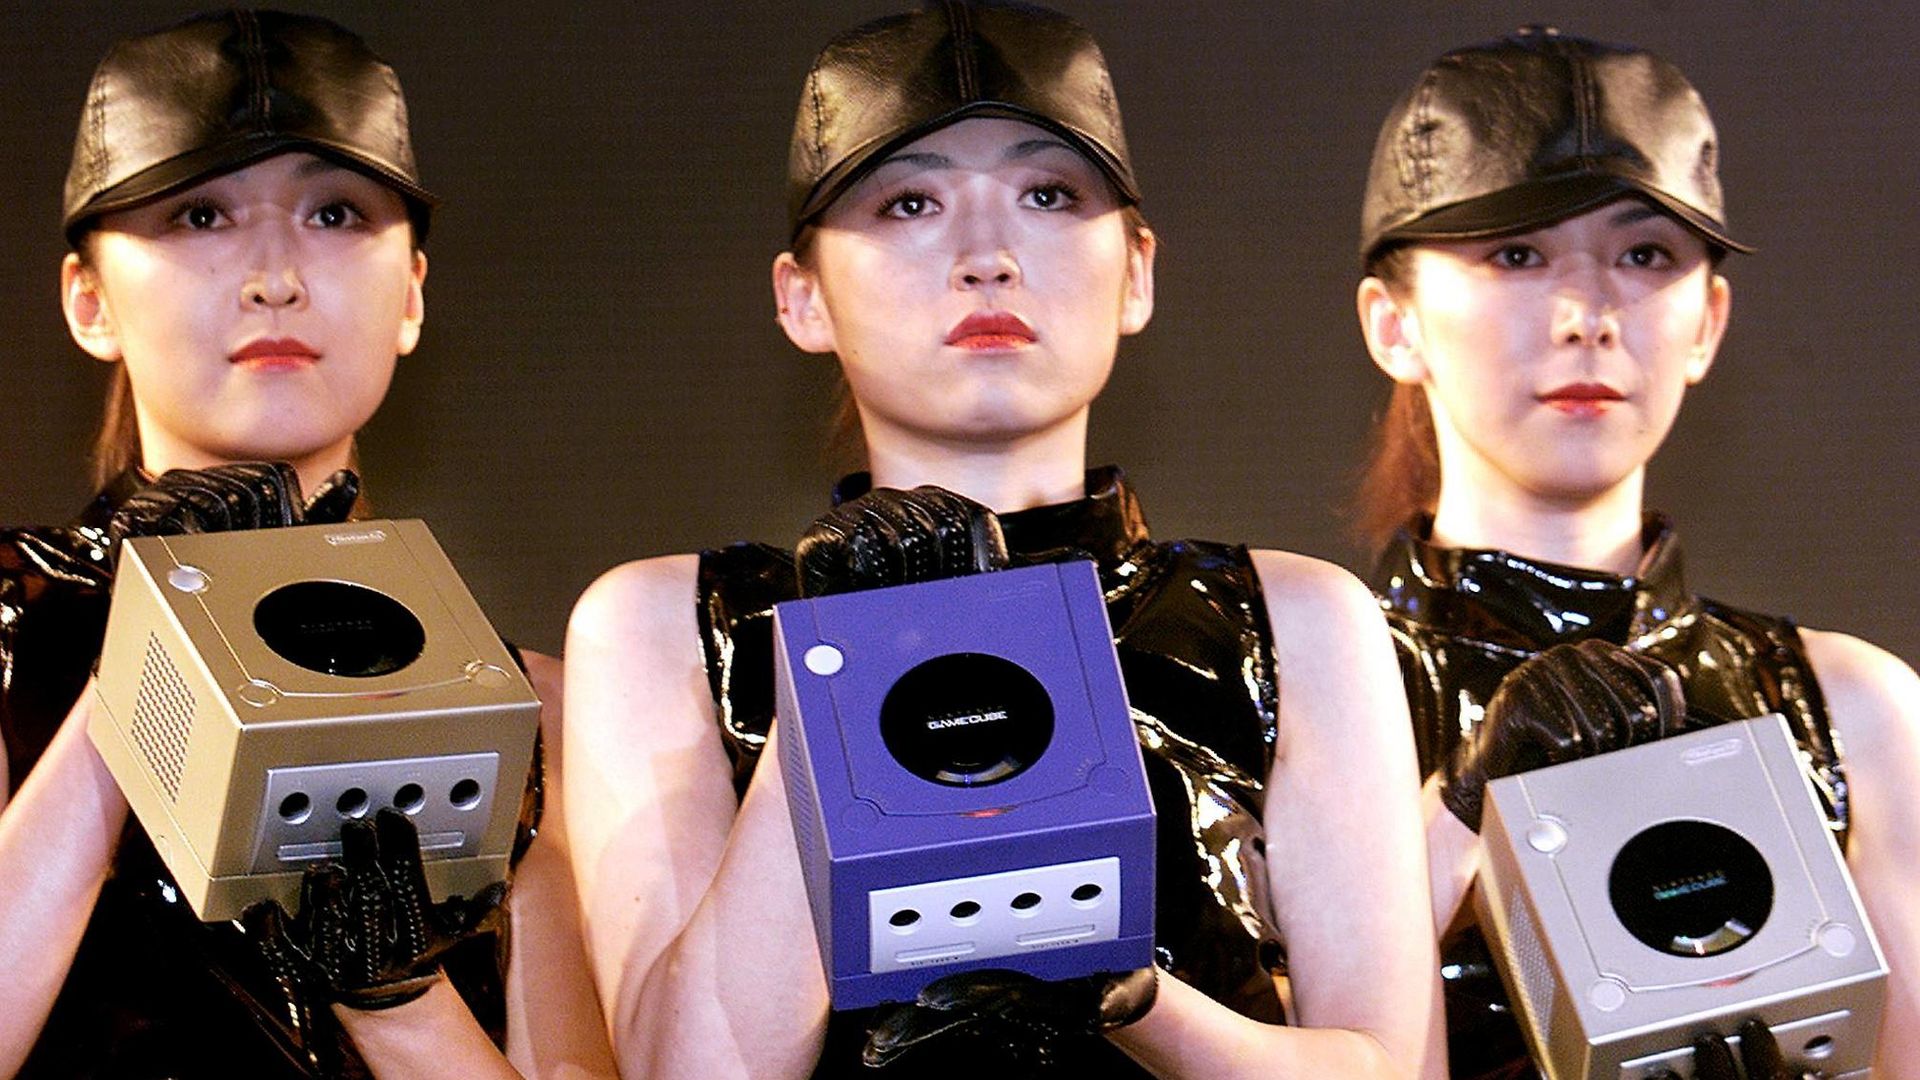 Three women in leather hats and tops holding cube-shaped gaming consoles.